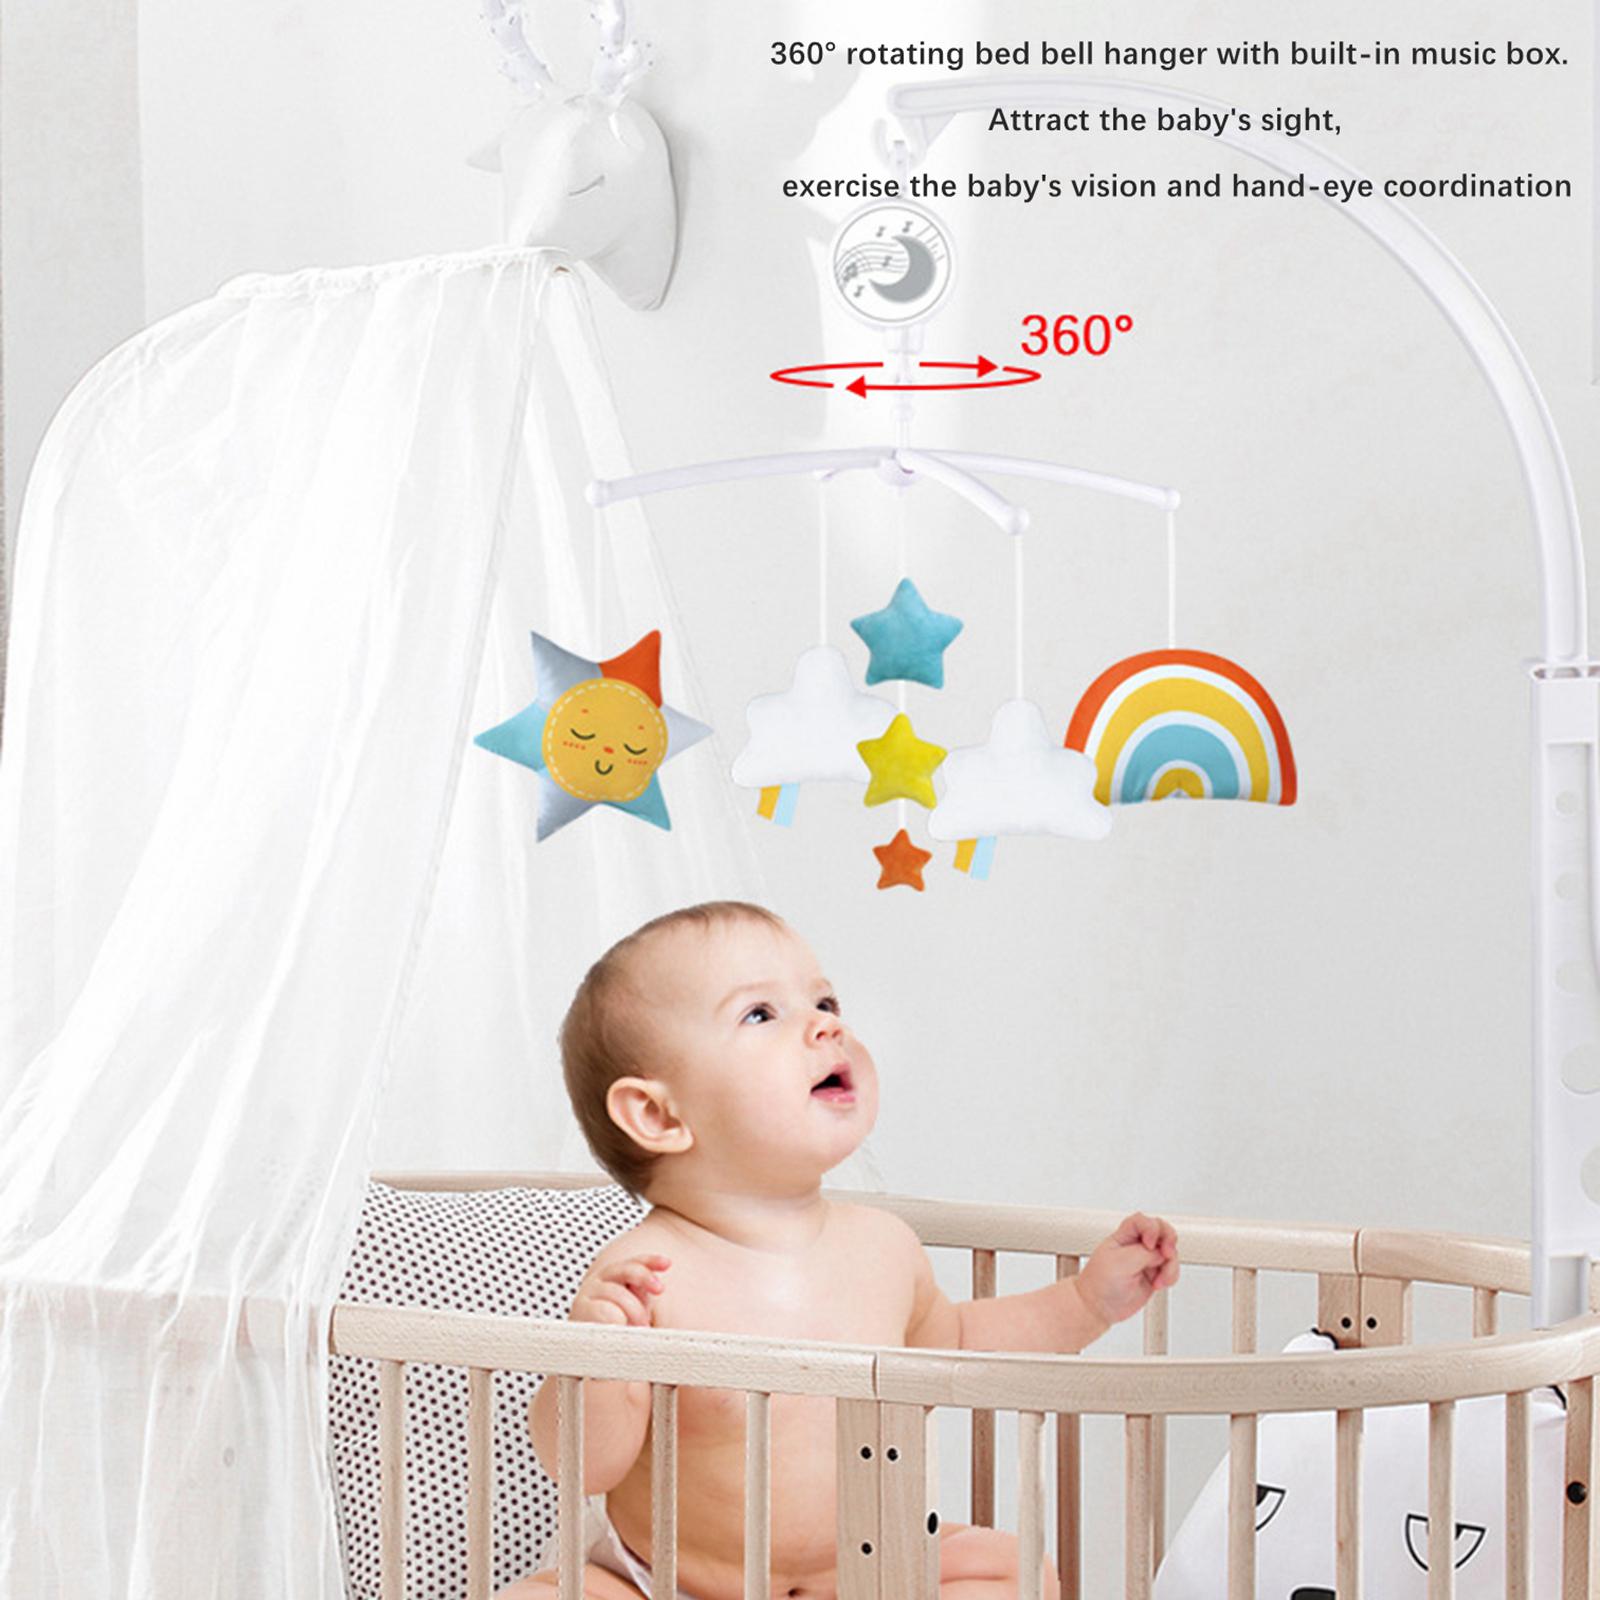 Perfeclan Musical Baby Crib Mobile Bed Bell Toy Newborn Rattles Mobile